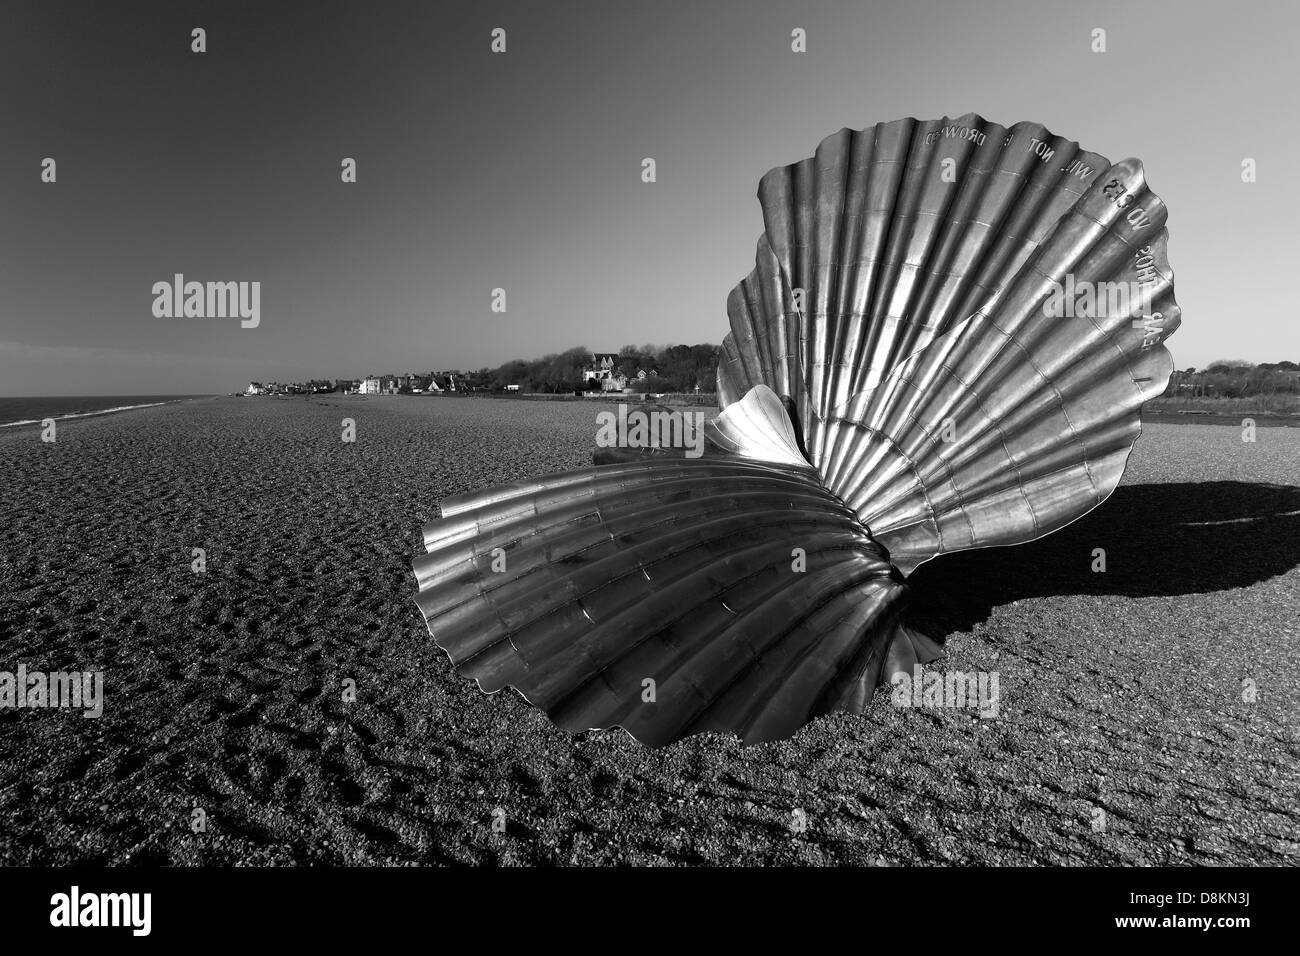 The Scallop shell sculpture by Maggie Hambling, on the beach, Aldeburgh town, Suffolk County, East Anglia, England. Stock Photo